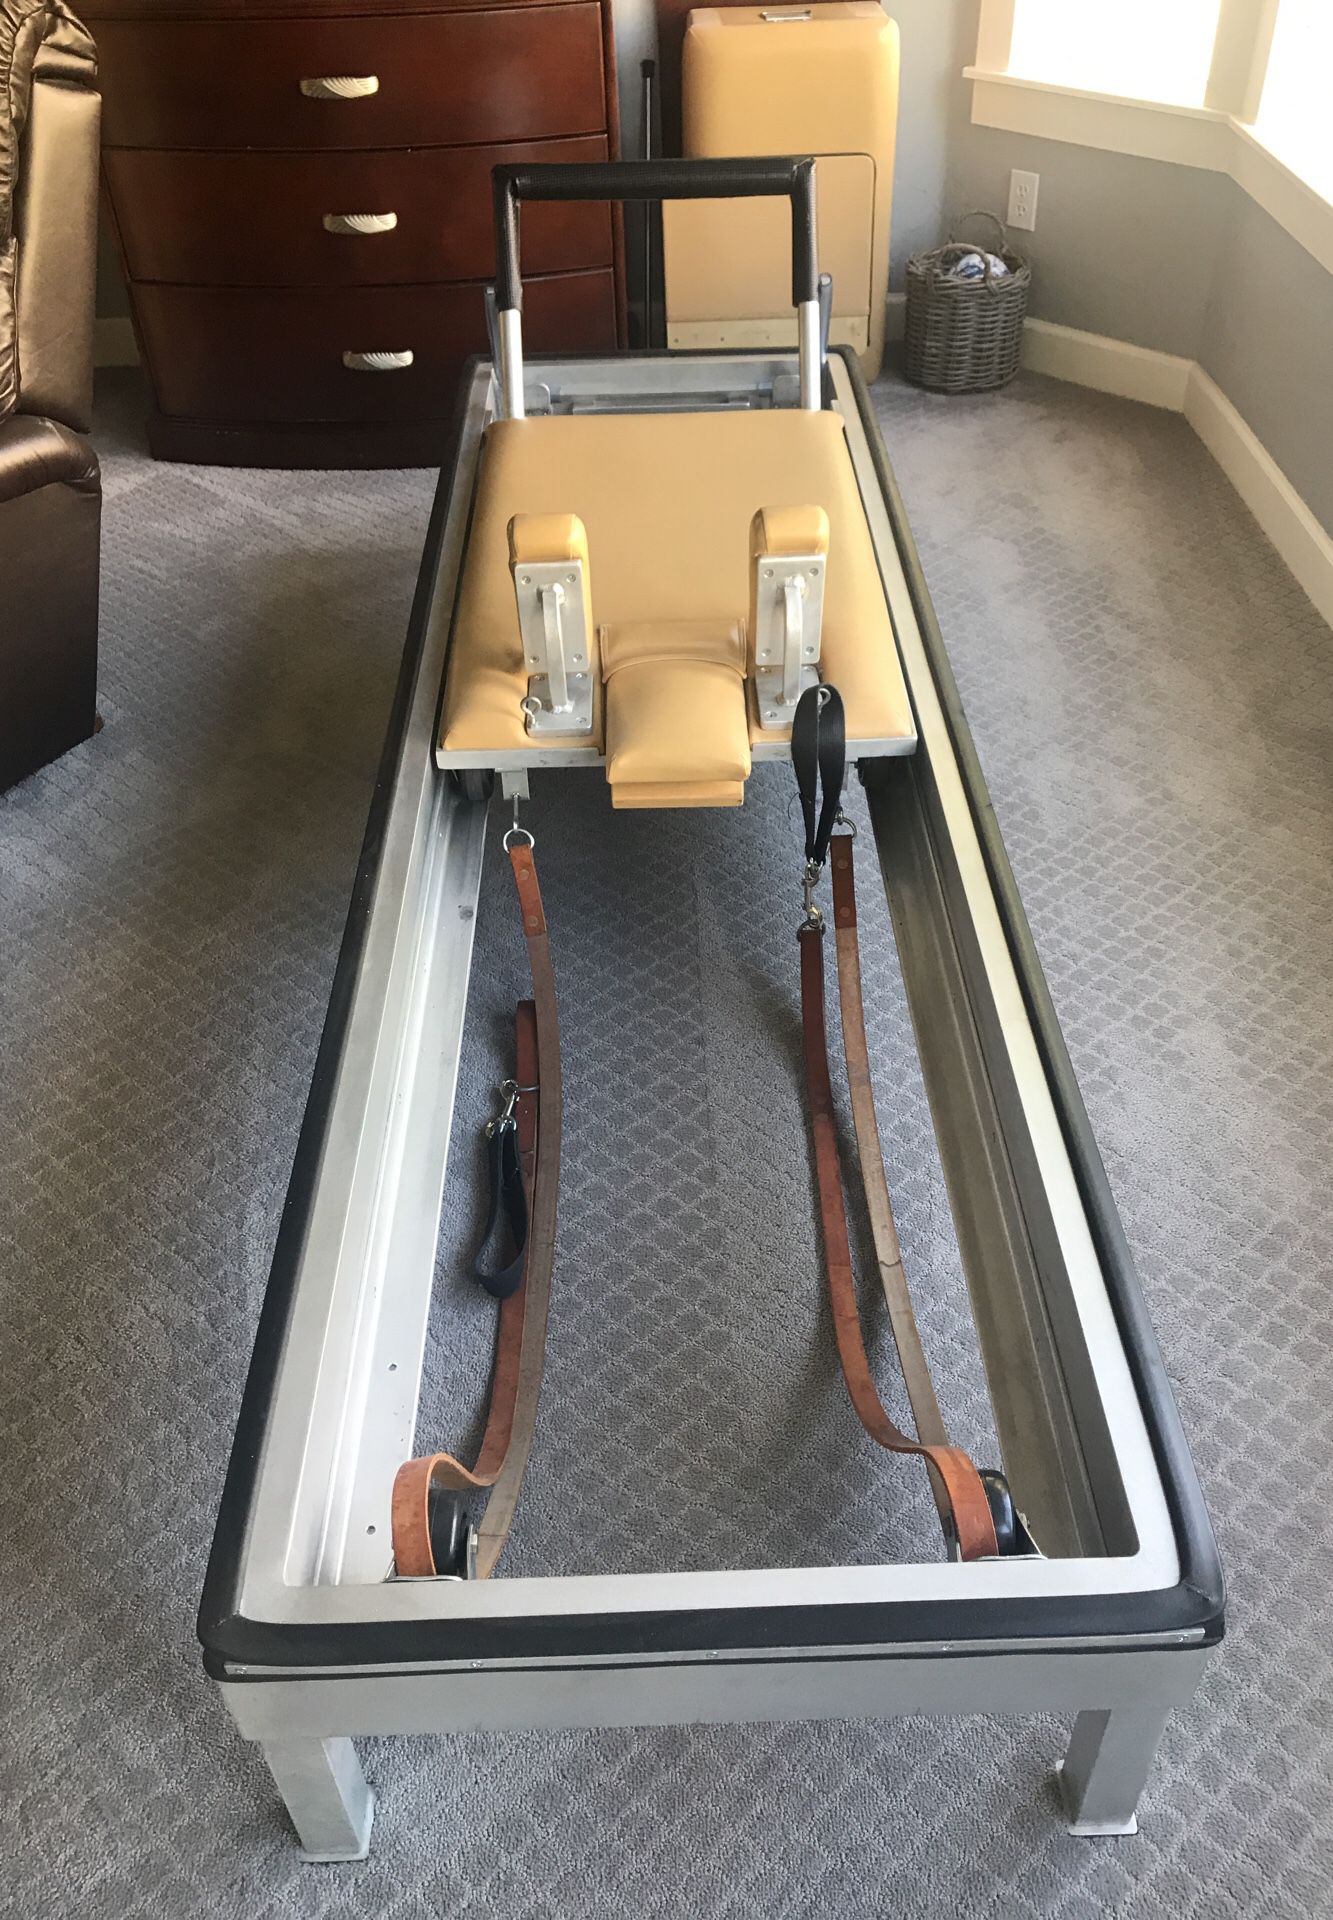 Gratz Reformer for Pilates $3600/obo. I'm the second owner. Works perfectly.